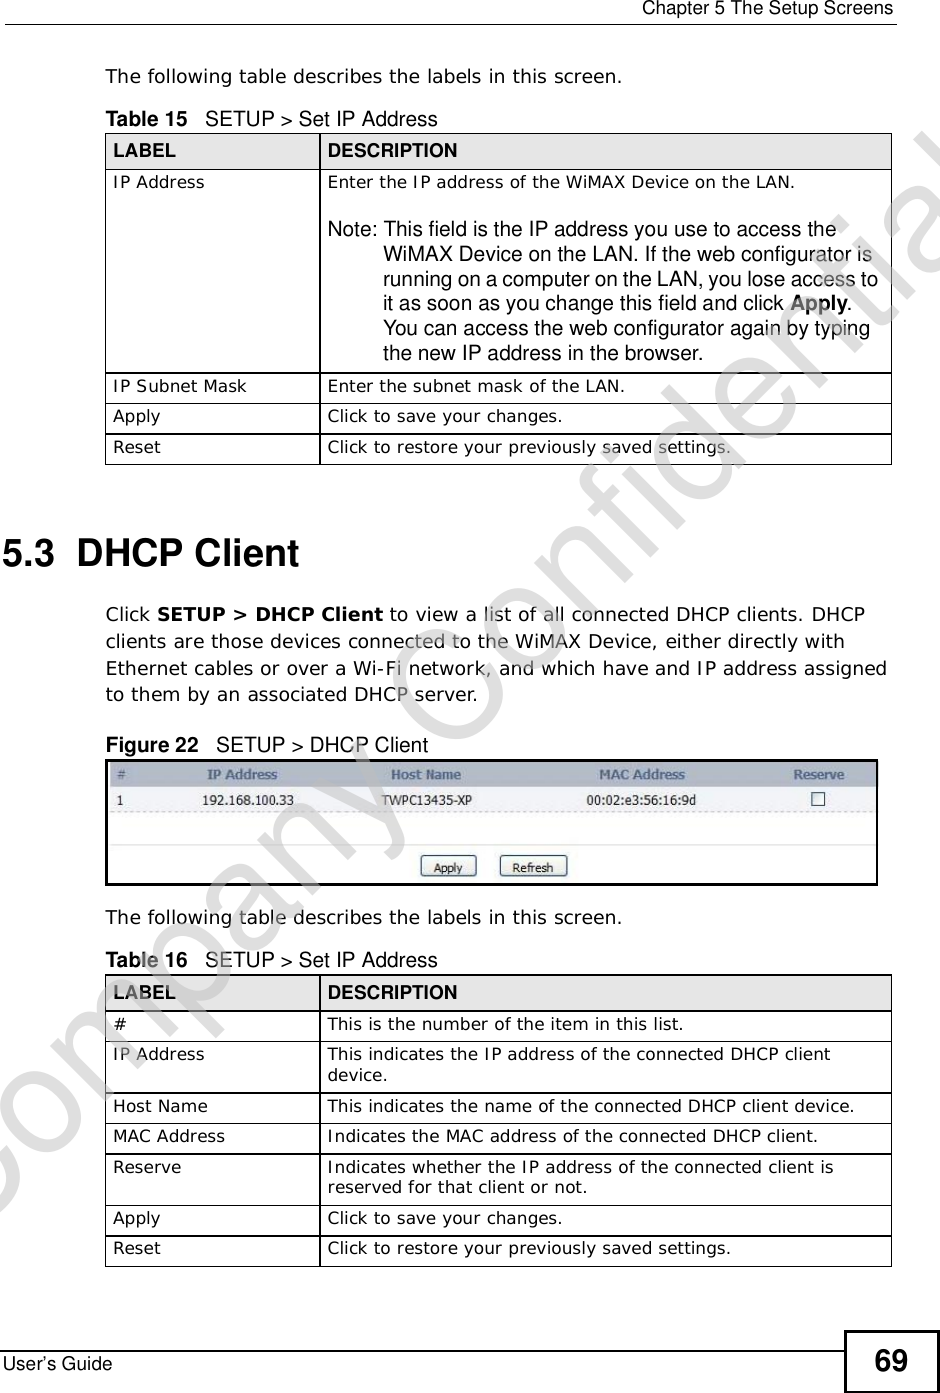  Chapter 5The Setup ScreensUser’s Guide 69The following table describes the labels in this screen.  5.3  DHCP ClientClick SETUP &gt; DHCP Client to view a list of all connected DHCP clients. DHCP clients are those devices connected to the WiMAX Device, either directly with Ethernet cables or over a Wi-Fi network, and which have and IP address assigned to them by an associated DHCP server.Figure 22   SETUP &gt; DHCP ClientThe following table describes the labels in this screen.  Table 15   SETUP &gt; Set IP AddressLABEL DESCRIPTIONIP Address Enter the IP address of the WiMAX Device on the LAN.Note: This field is the IP address you use to access the WiMAX Device on the LAN. If the web configurator is running on a computer on the LAN, you lose access to it as soon as you change this field and click Apply.You can access the web configurator again by typing the new IP address in the browser.IP Subnet Mask Enter the subnet mask of the LAN.Apply Click to save your changes.Reset Click to restore your previously saved settings.Table 16   SETUP &gt; Set IP AddressLABEL DESCRIPTION#This is the number of the item in this list.IP Address This indicates the IP address of the connected DHCP client device.Host Name This indicates the name of the connected DHCP client device.MAC Address Indicates the MAC address of the connected DHCP client.Reserve Indicates whether the IP address of the connected client is reserved for that client or not.Apply Click to save your changes.Reset Click to restore your previously saved settings.Company Confidential